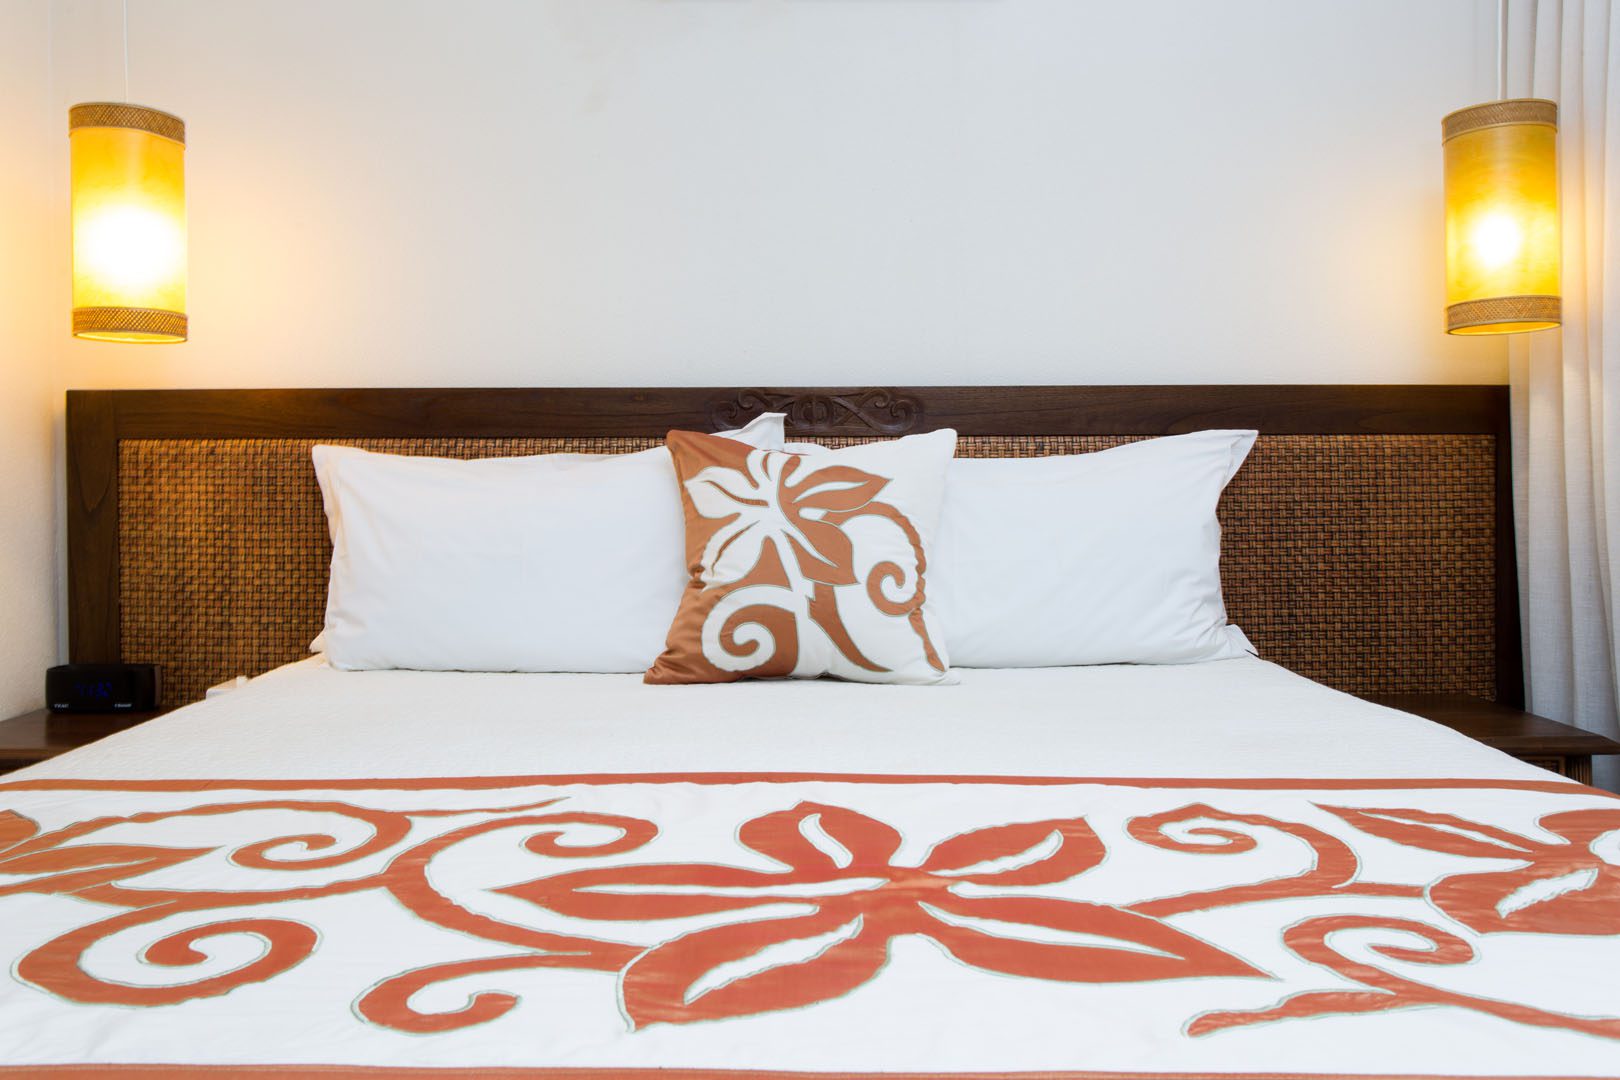 Image of Polynesian Flare between the king size bed to enhance lighting in the room